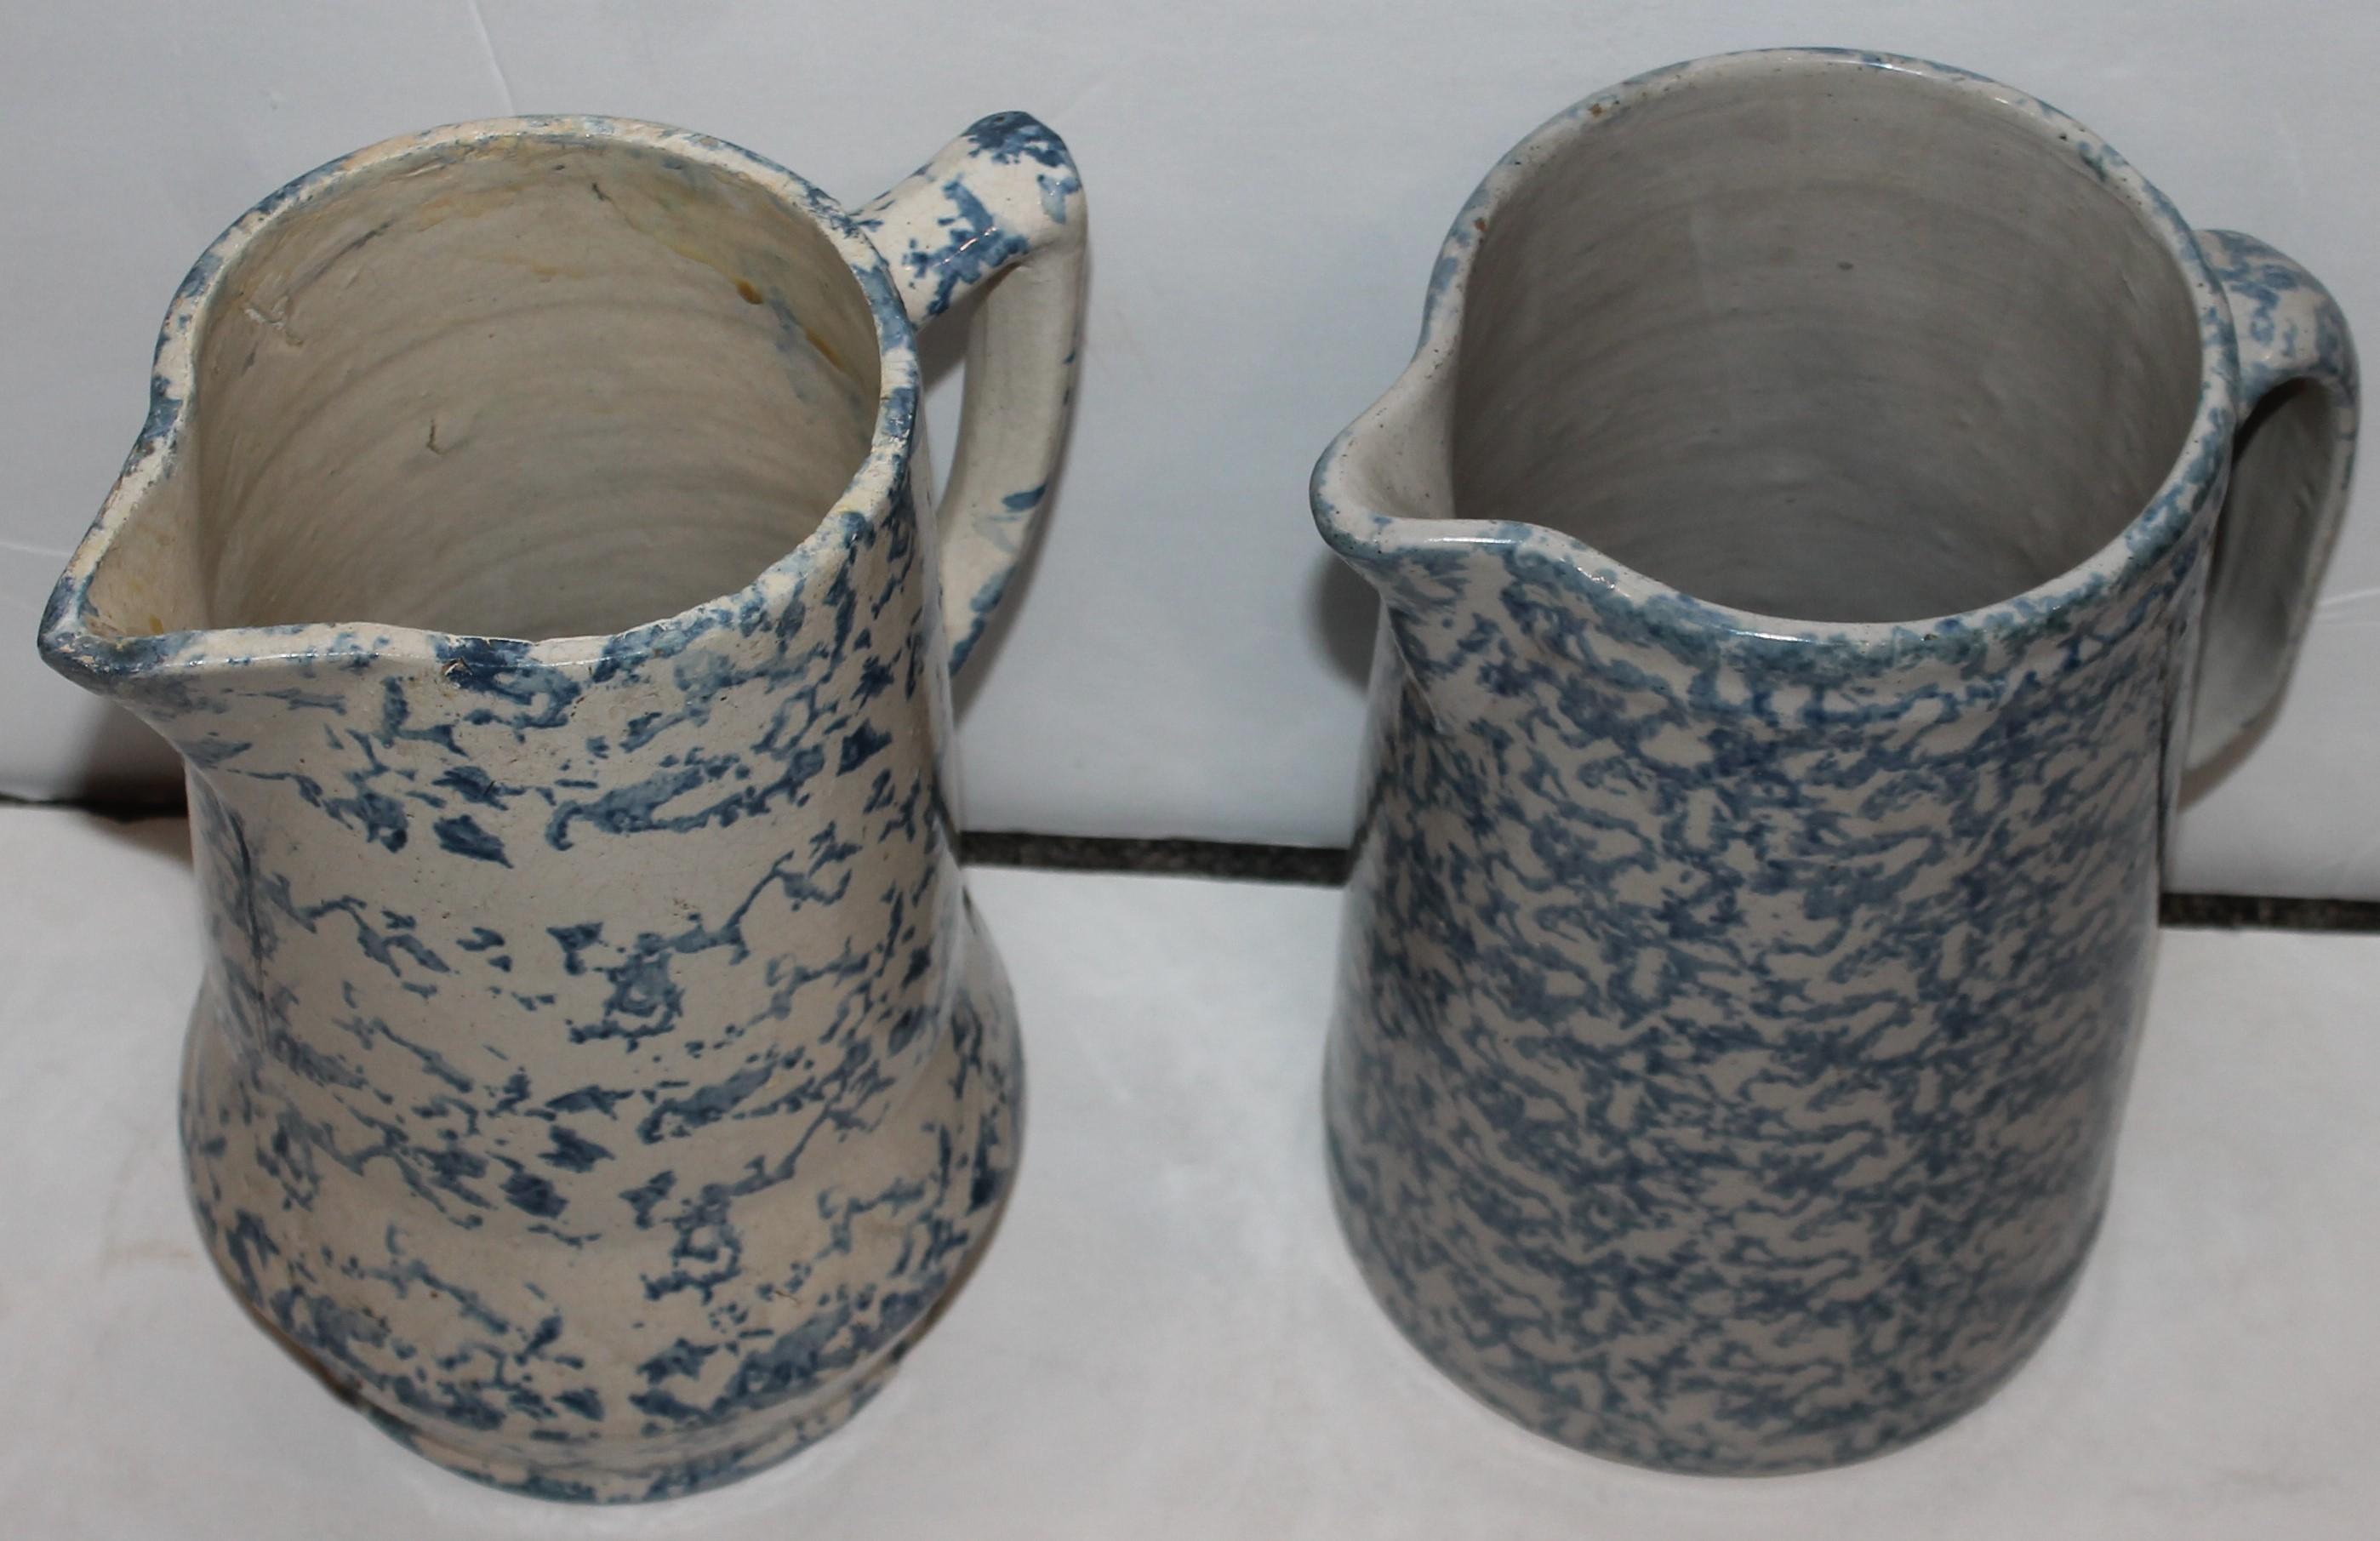 Collection of 19th Century Sponge Ware Pottery Pitchers-4 2